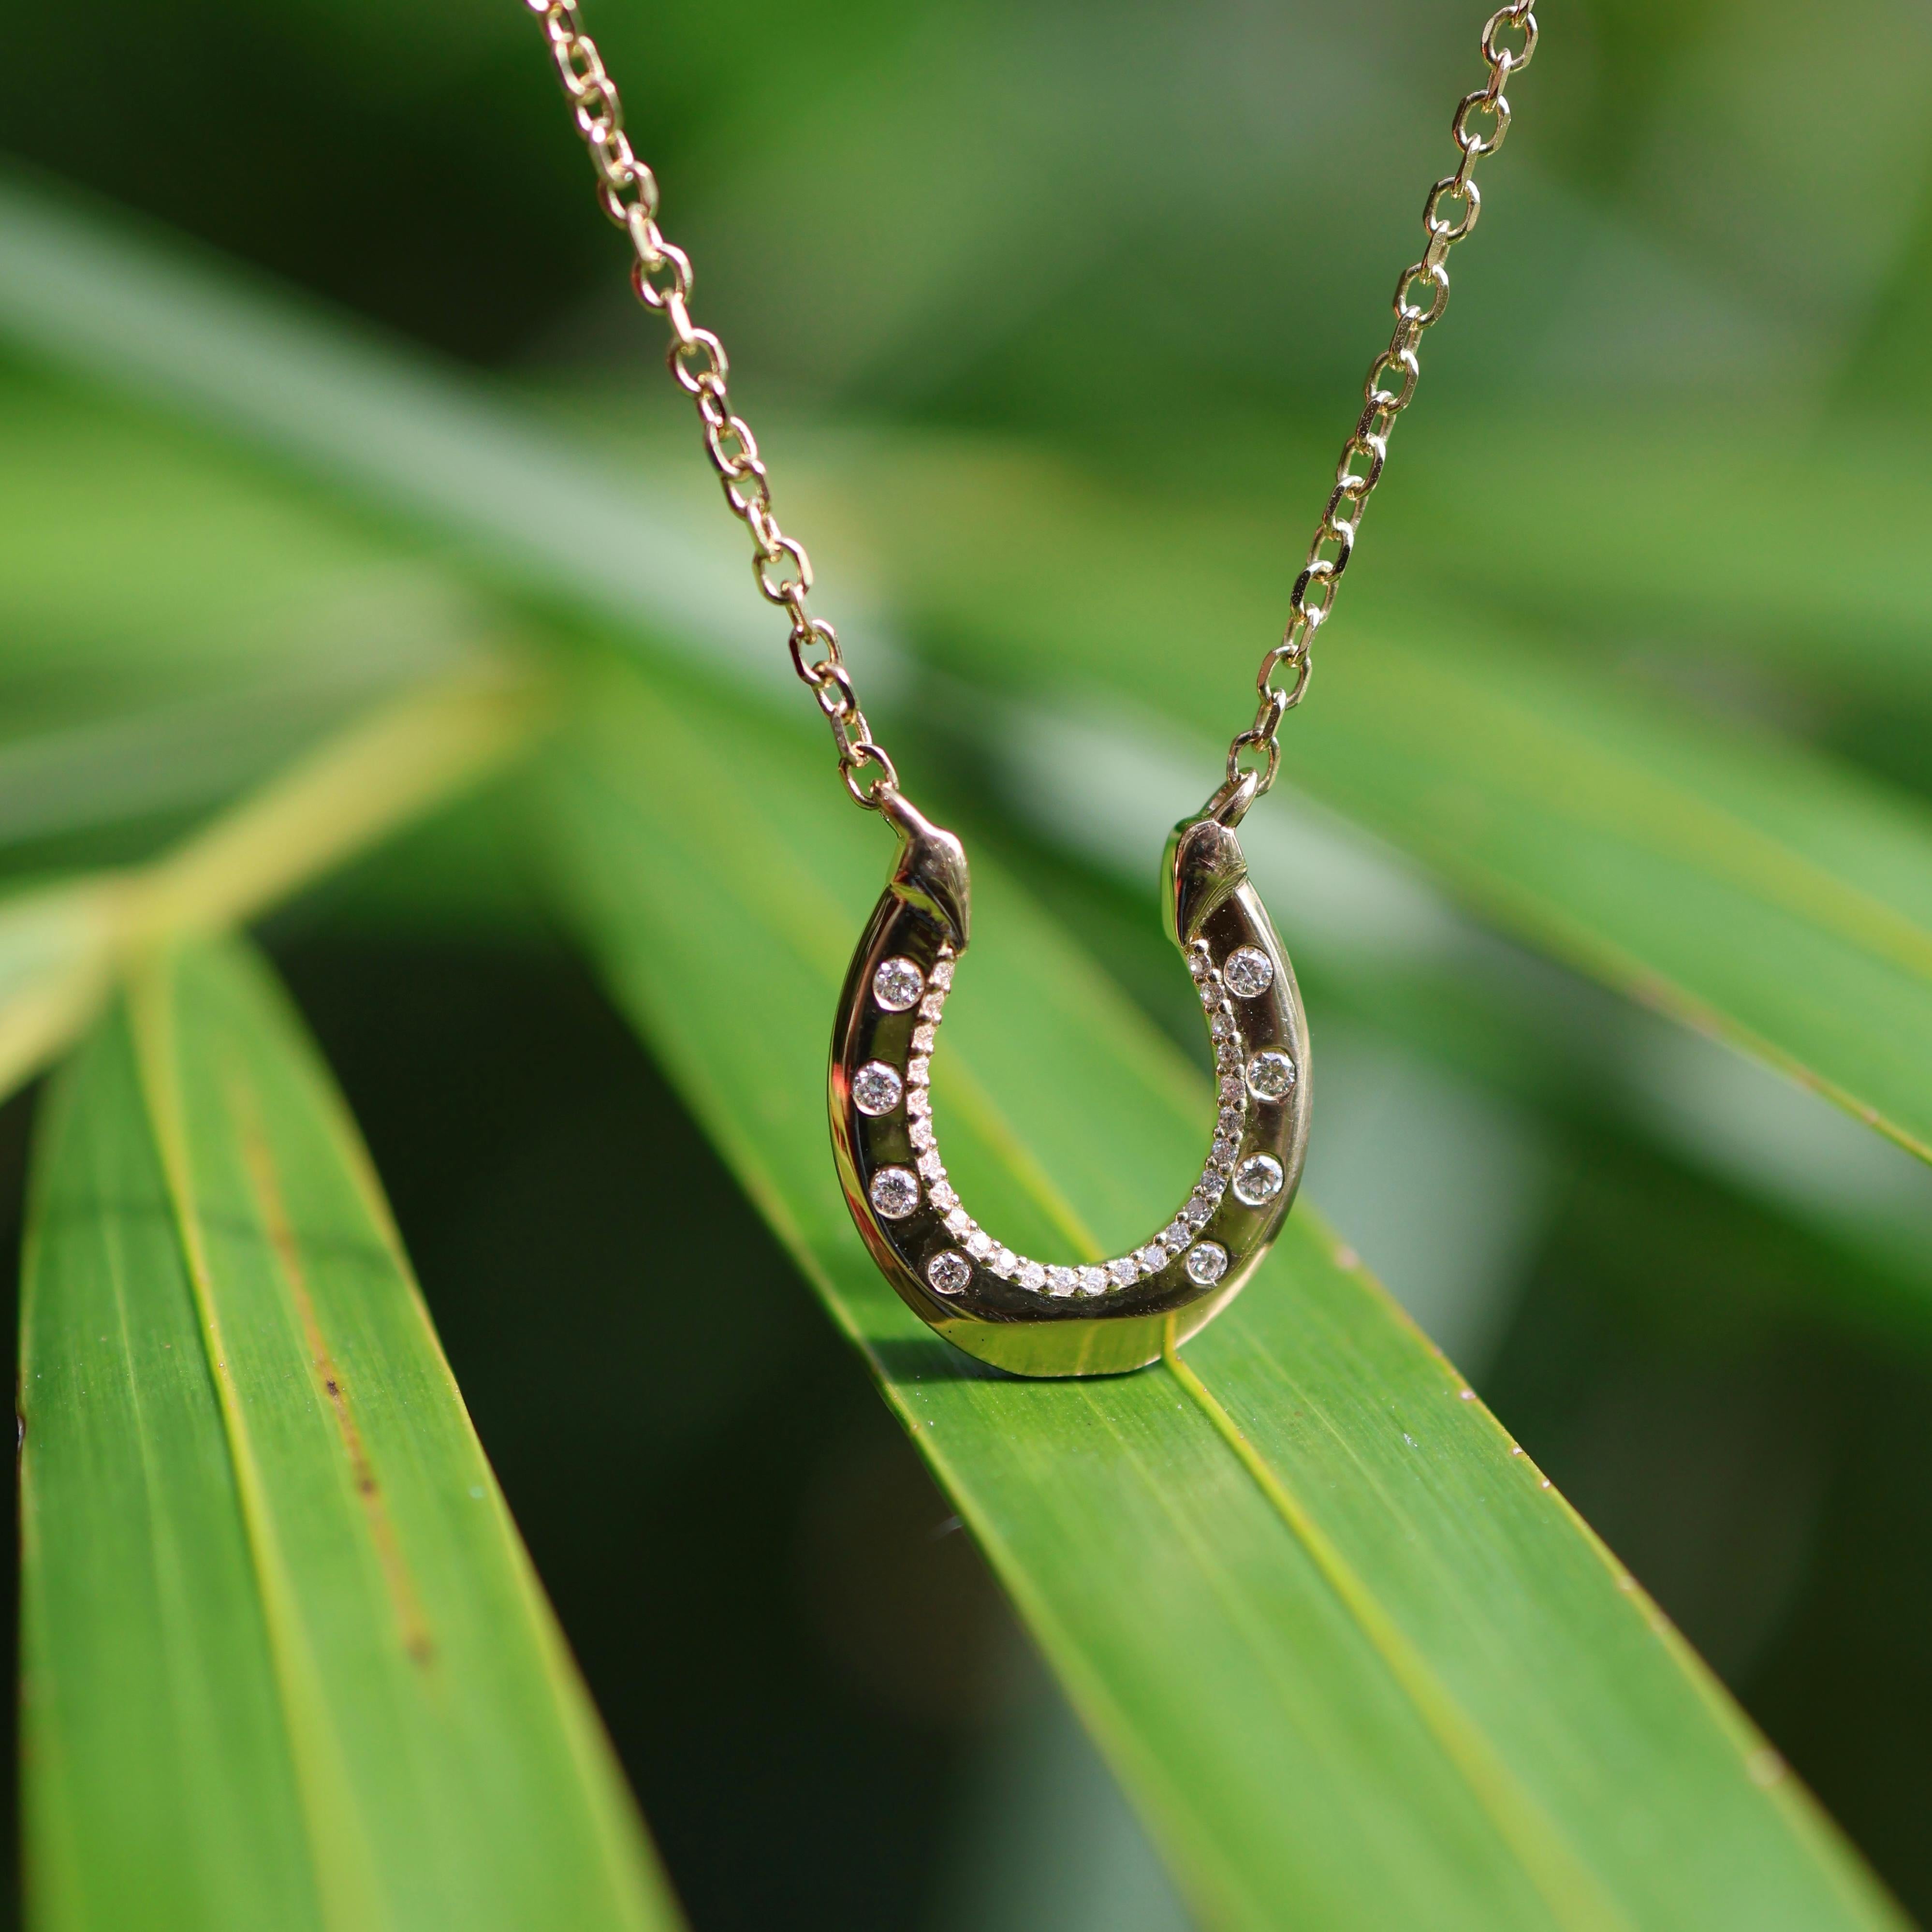 Crafted with meticulous attention to detail, this necklace features a horseshoe pendant adorned with shimmering diamonds, set in exquisite 18k yellow gold.

The horseshoe, known for its protective charm, is elegantly re-imagined in this stunning